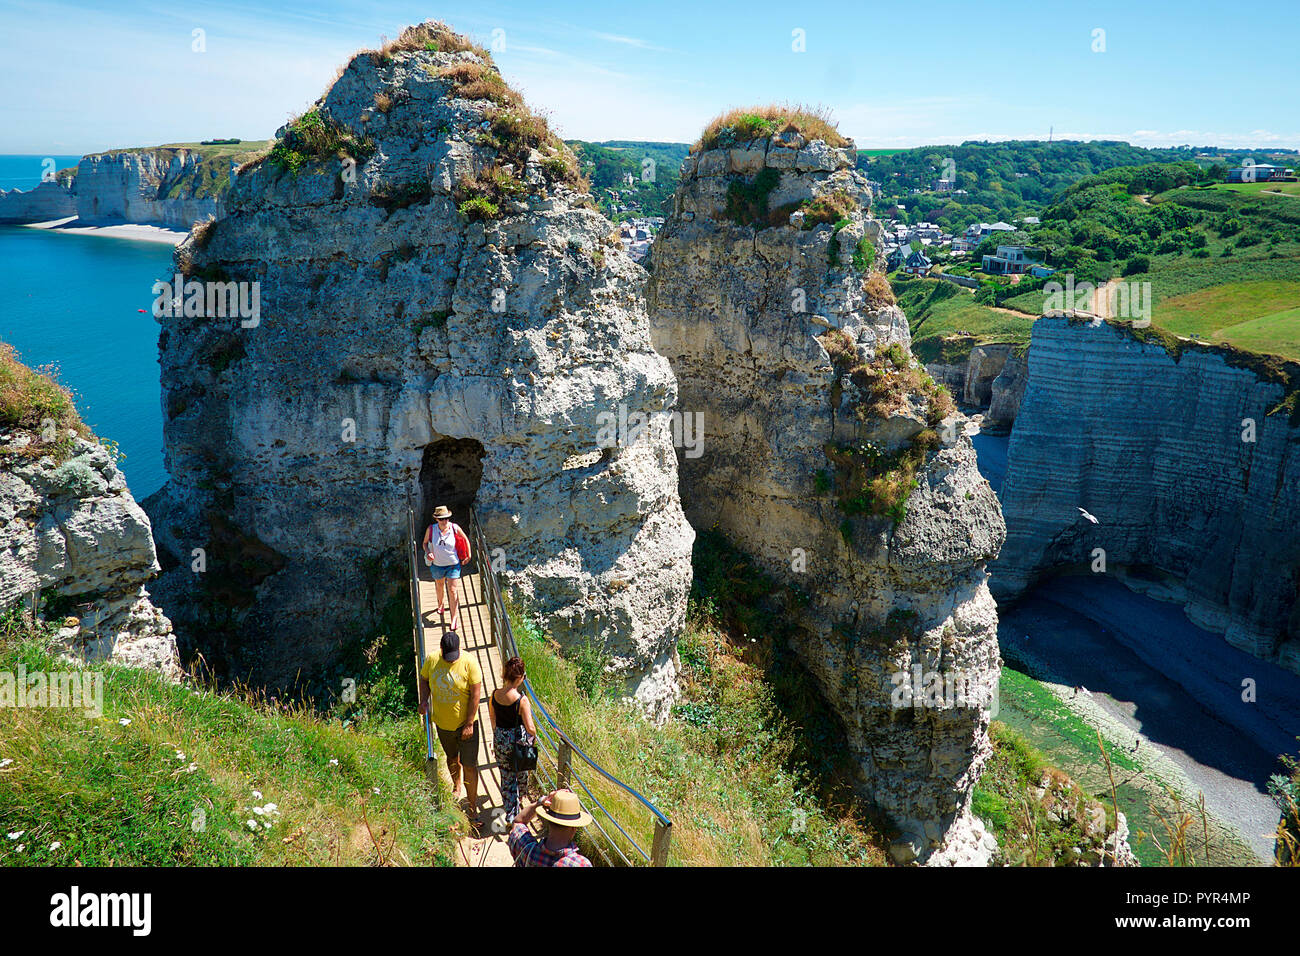 Oberhalb von Porte d«Aval, Fels mit Gang. On top of Porte d«Aval, cliff with passageway/ gang/ walk. Stock Photo